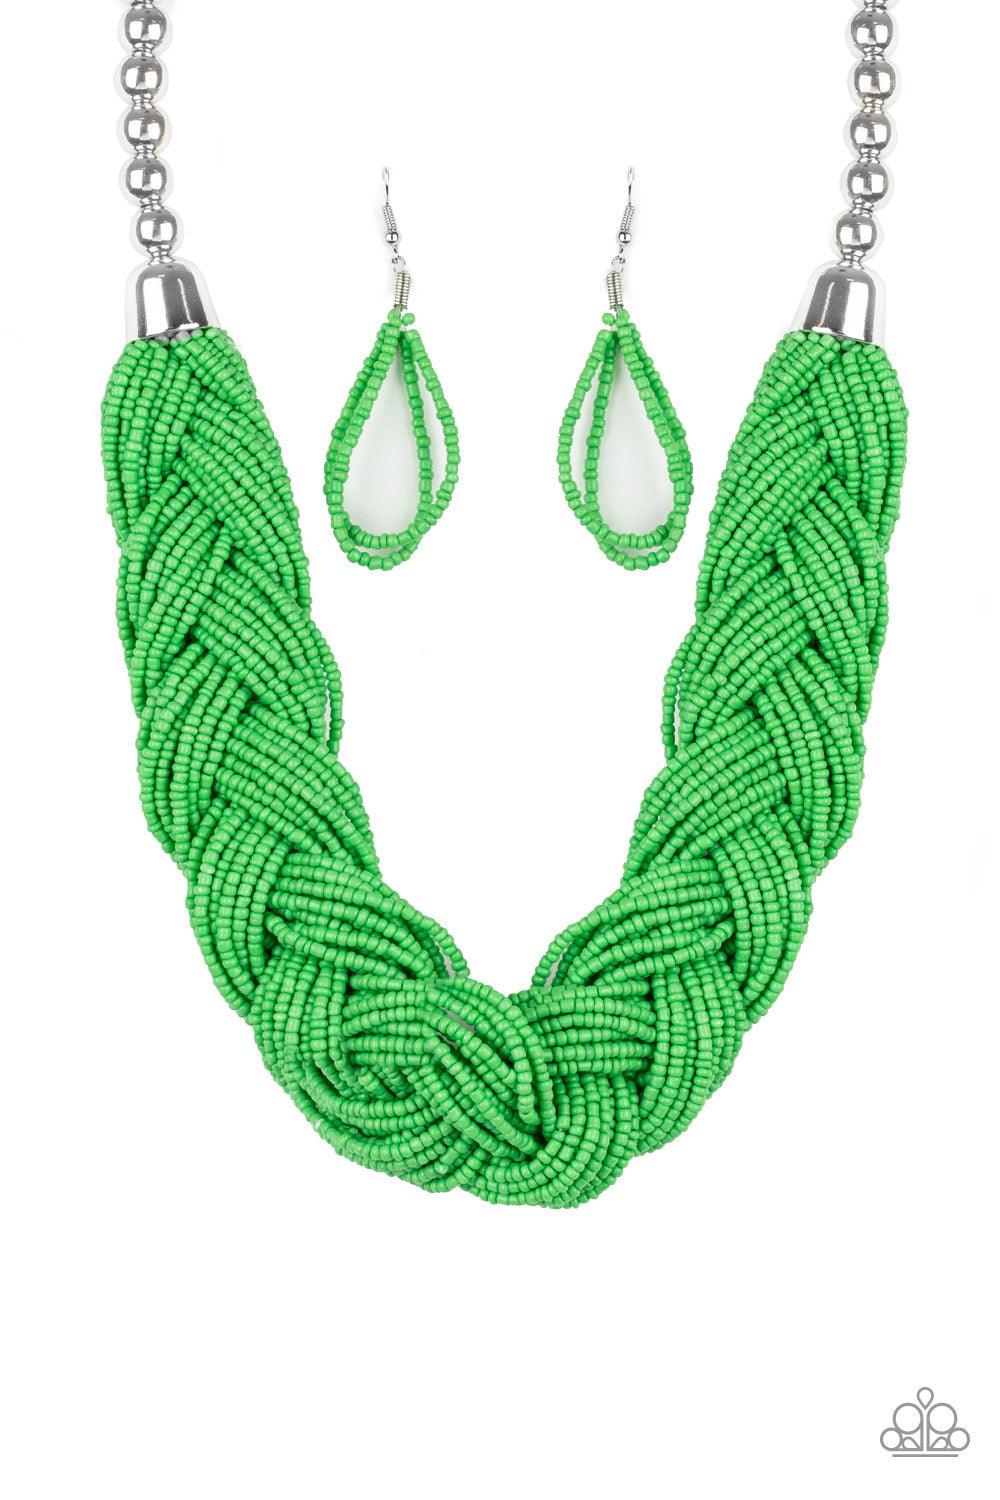 Paparazzi Accessories The Great Outback - Green Brushed in an energetic green hue, countless seed beads weave into an indigenous braid below the collar. The colorful strands attach to large silver beads, adding a hint of metallic shimmer to the playful de